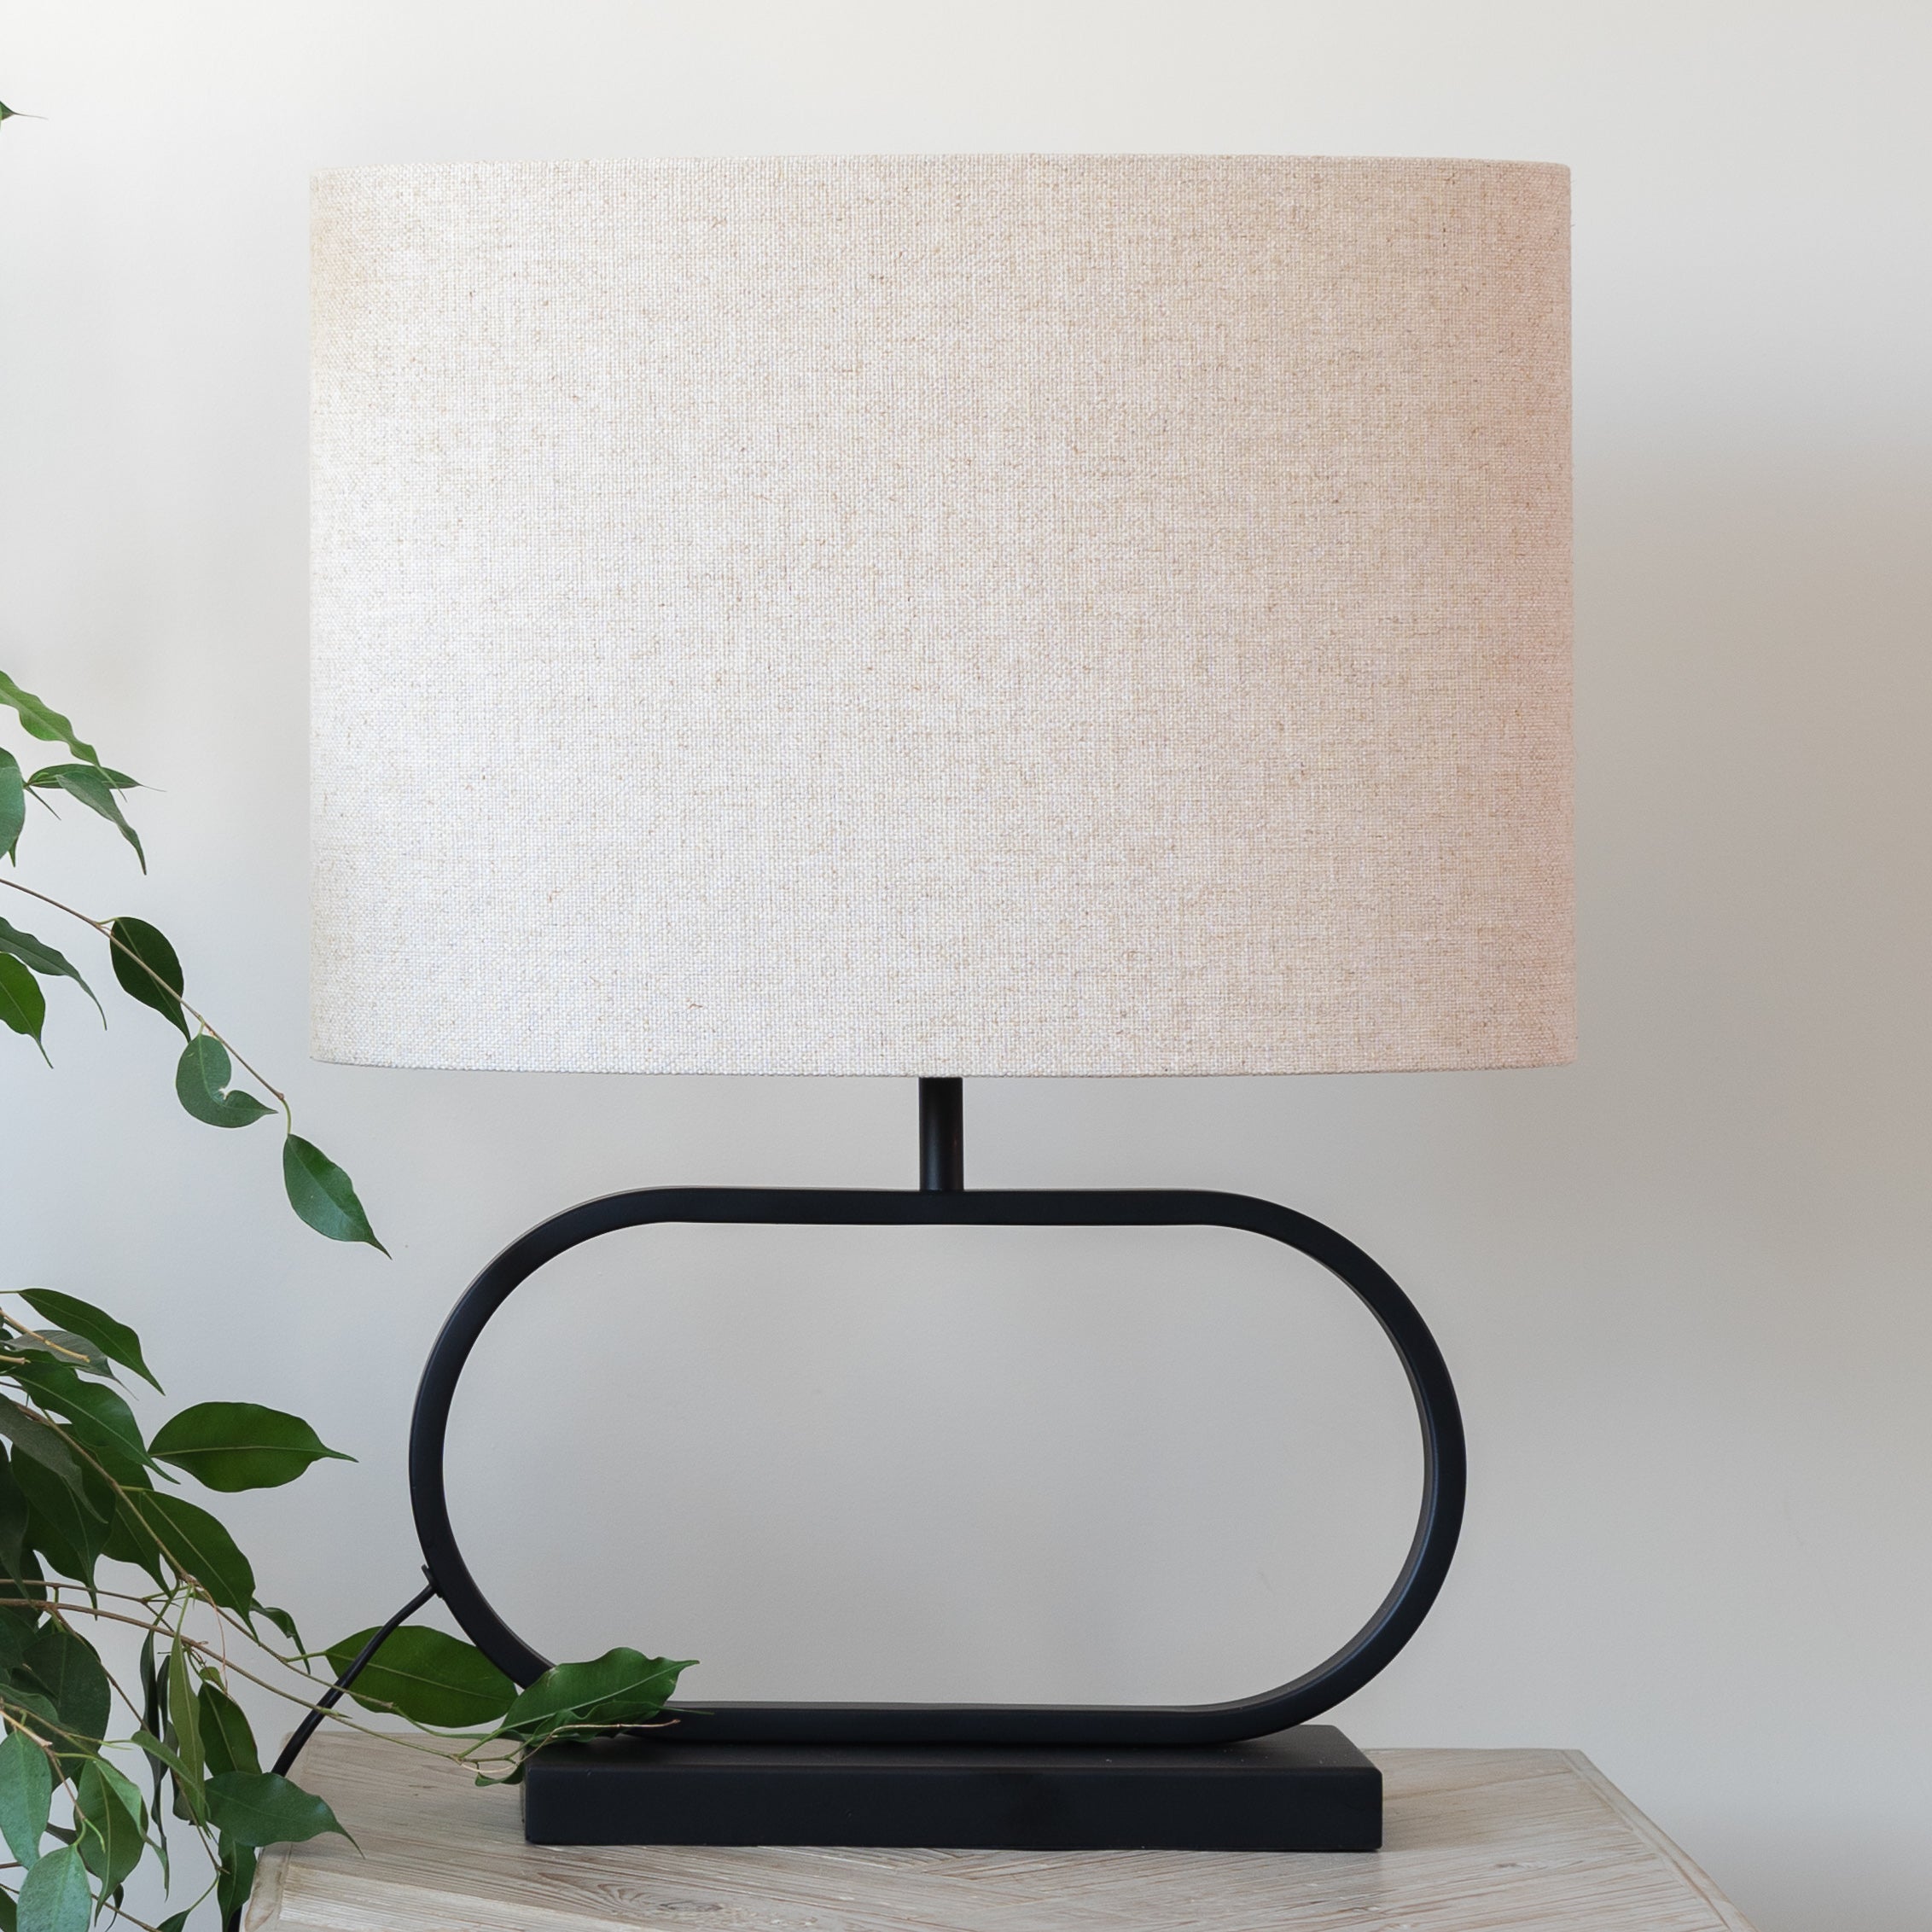 Jamiro Black Metal Oval Table Lamp with Natural Linen Shade